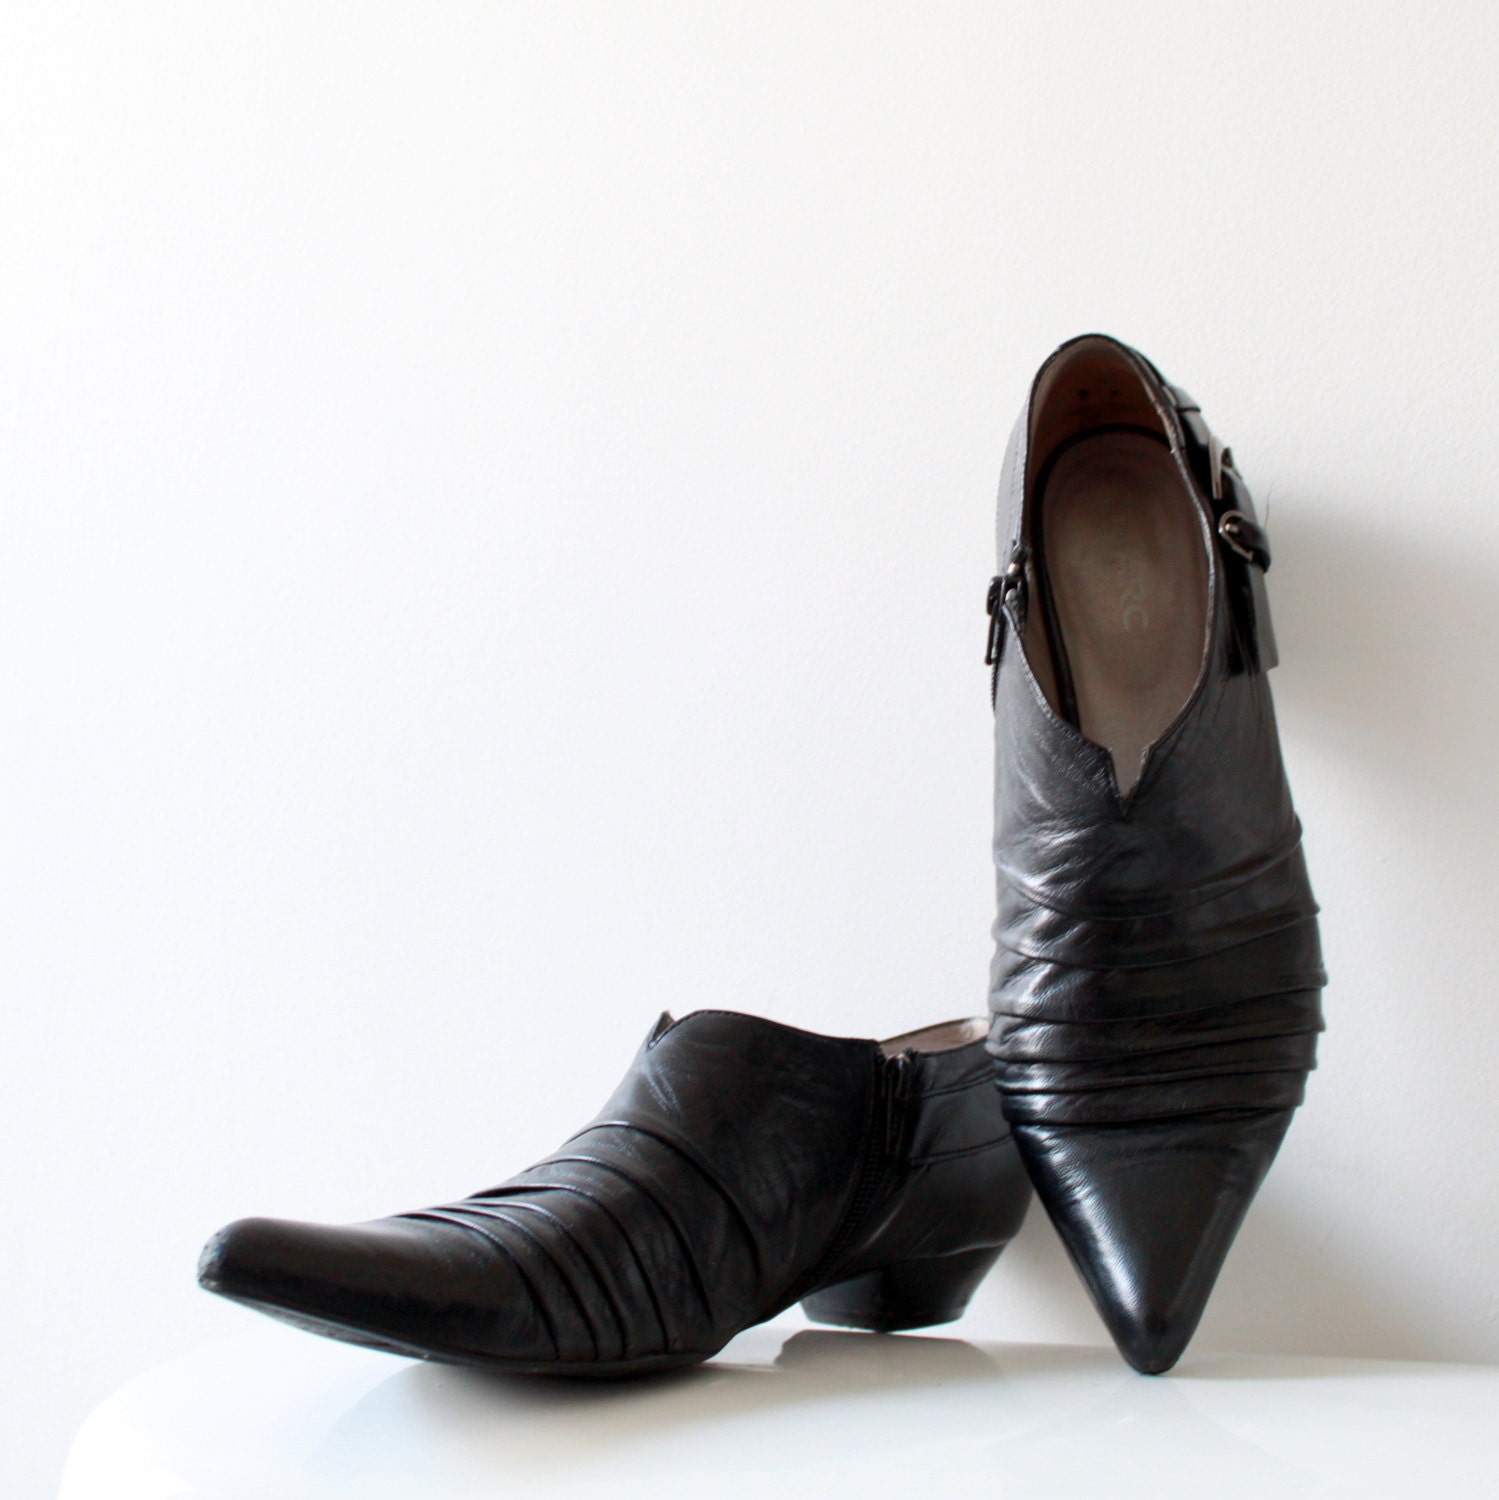 Vintage Black Soft Leather Shoes, Ankle Booties Size 39 EU, 7.5, 8 US - Made in Germany by Marc - FullCircleRetro